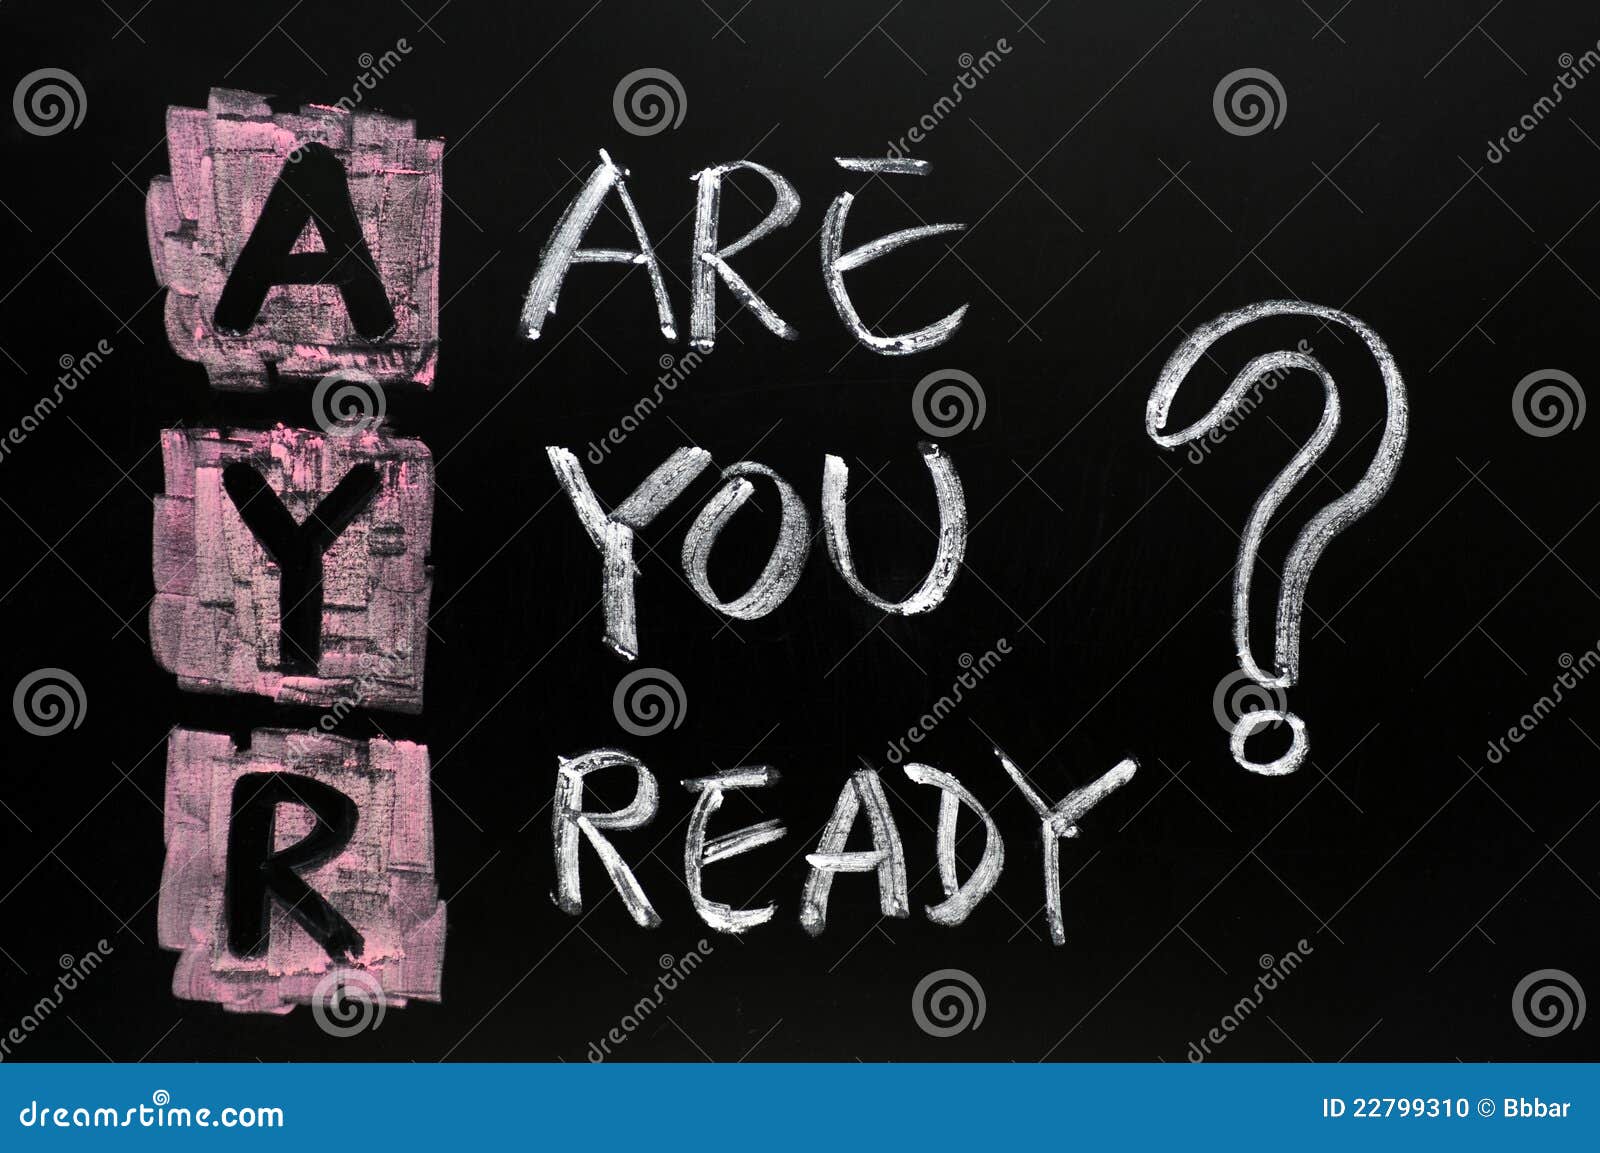 clip art are you ready - photo #11